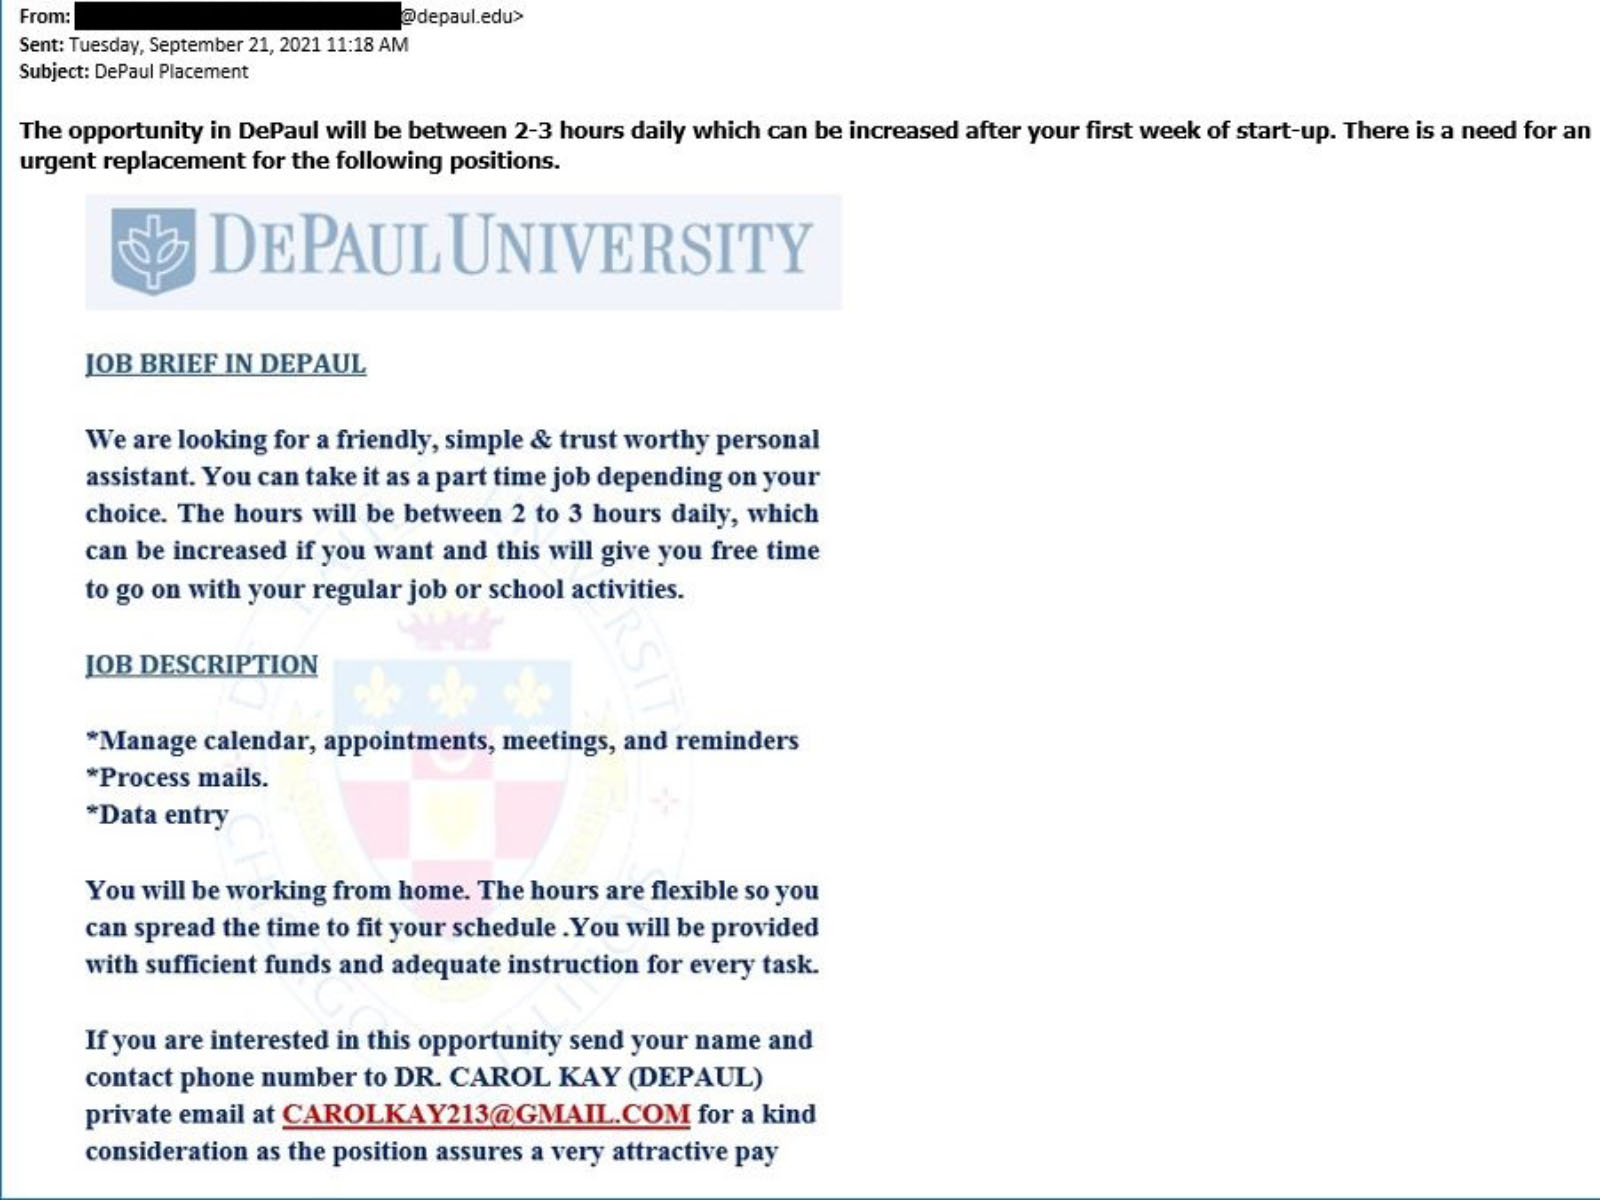 Screnshot of a malicious email. The email attempts to trick victims into applying for a fake job.